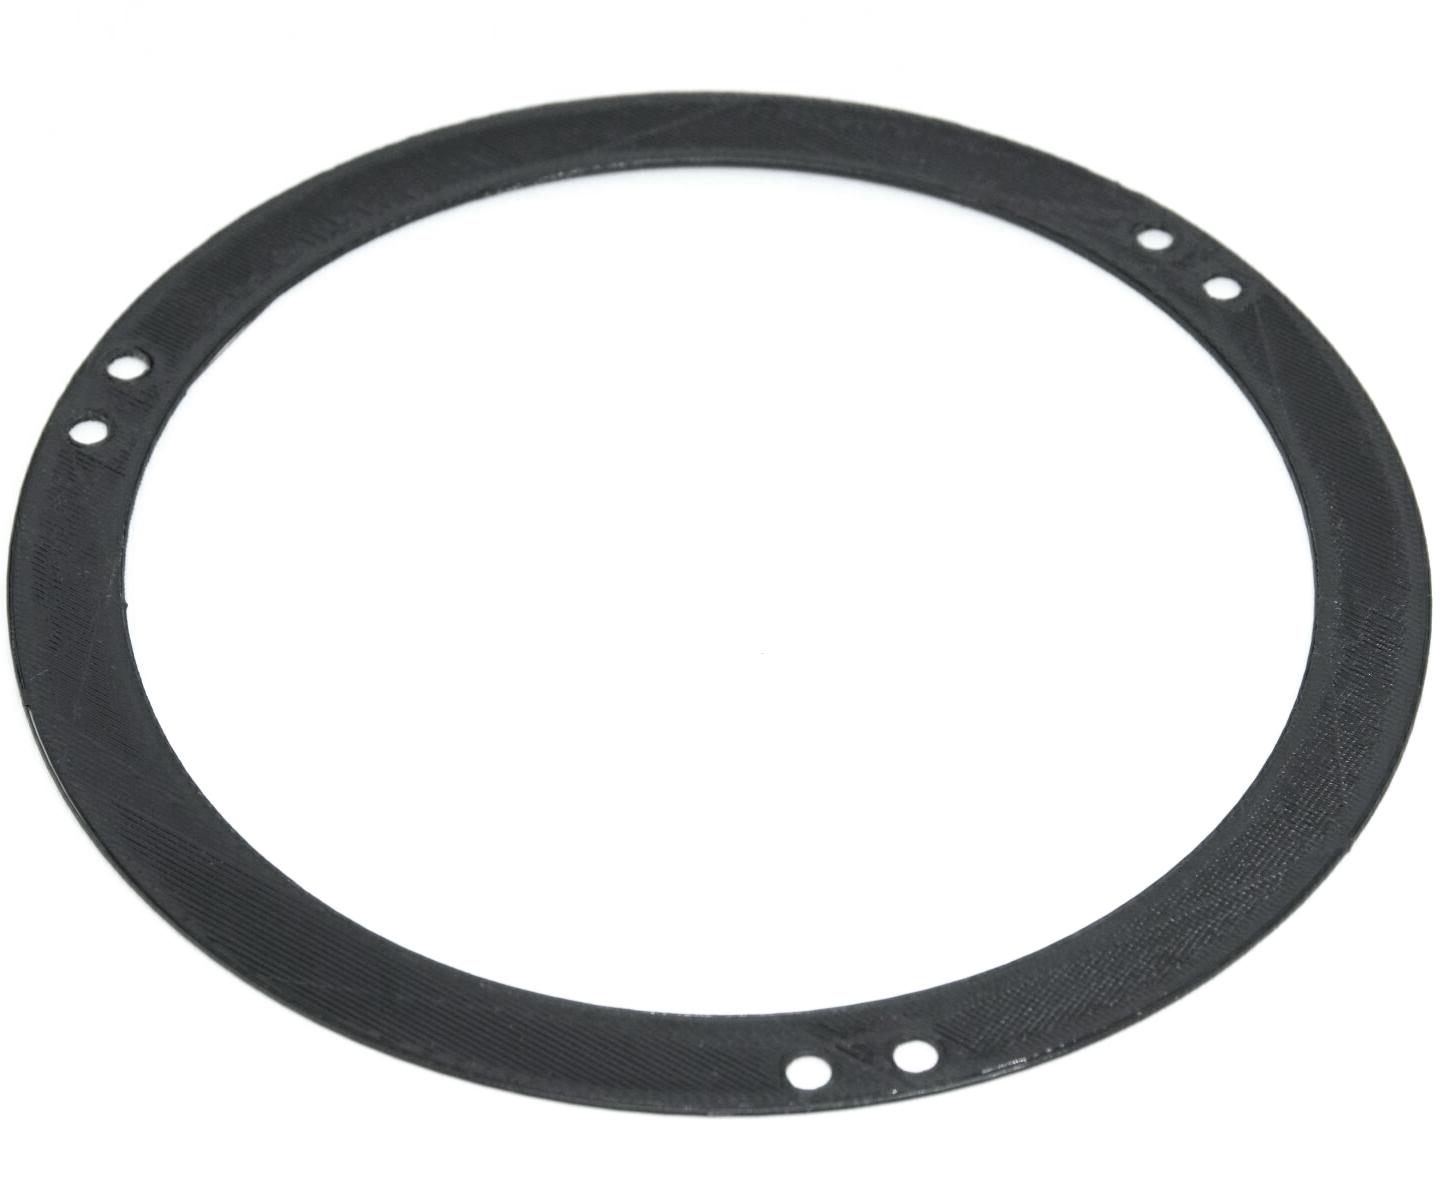  The baffle ring prevents or significantly reduces the "bloating" of stars in deep sky shots. [EN] 